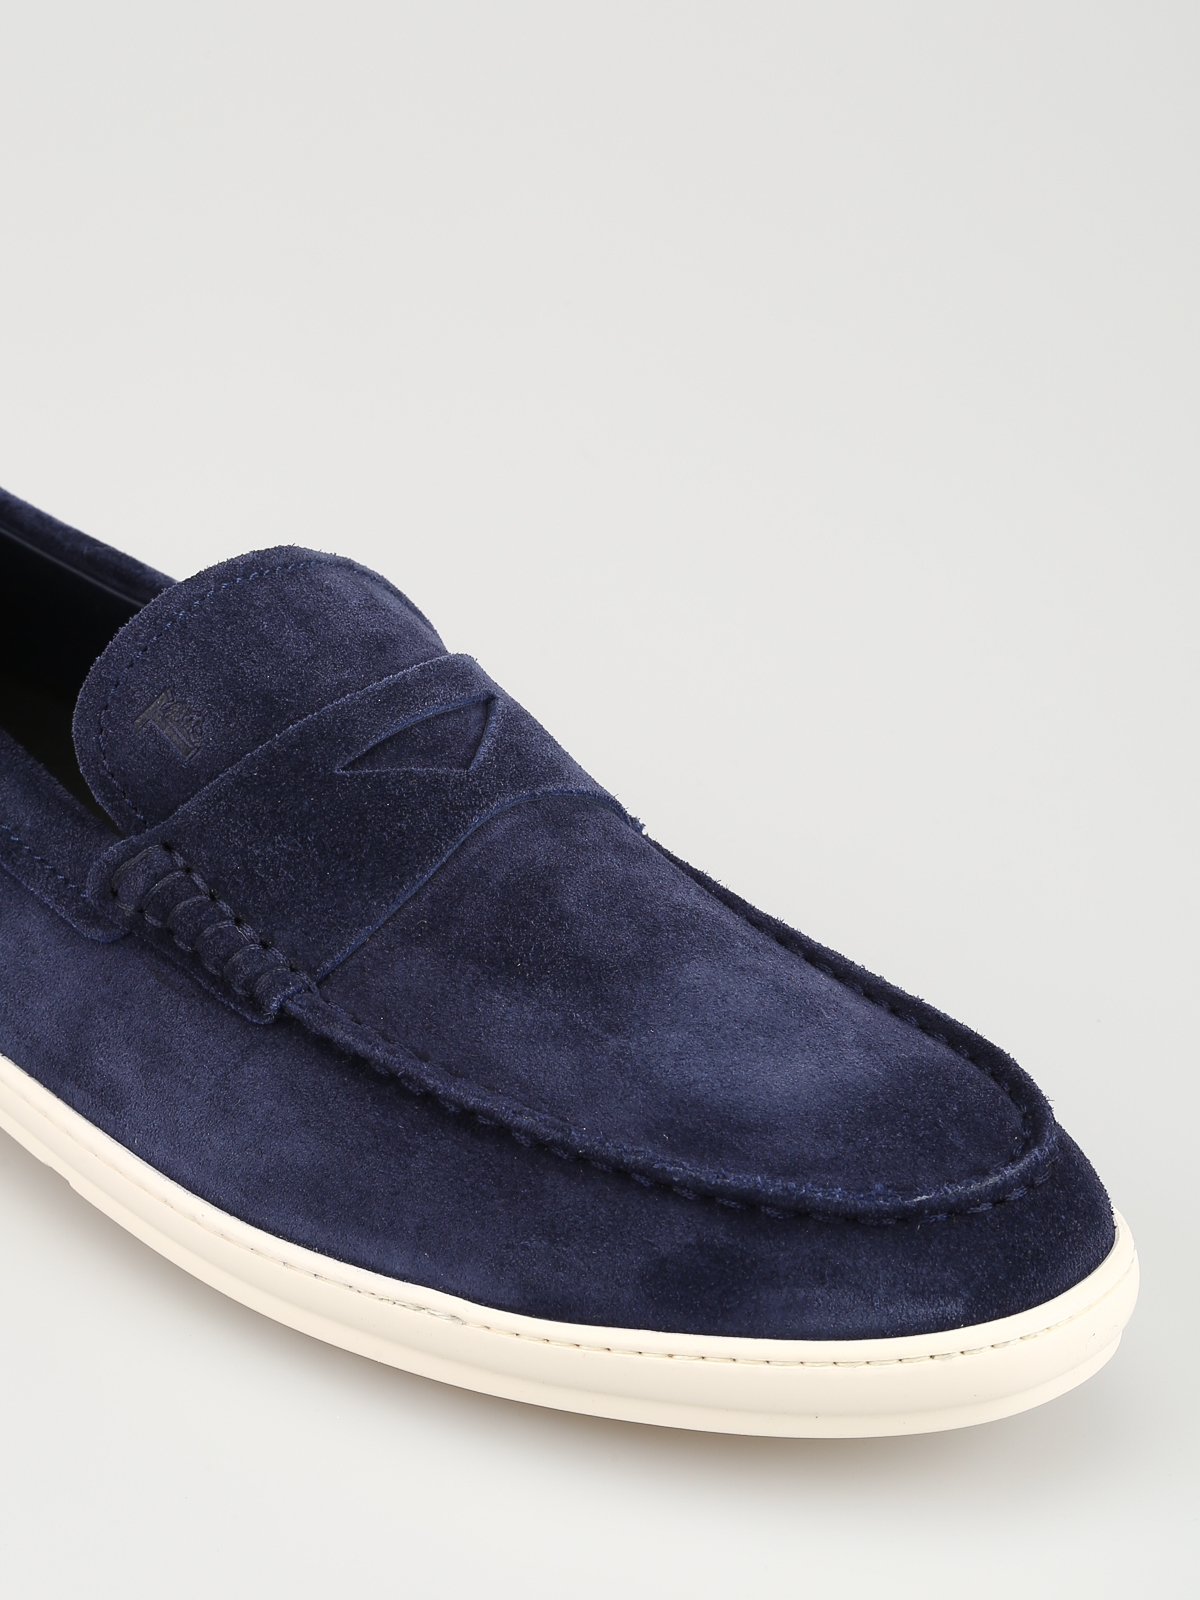 Rubber sole detailed blue suede loafers 